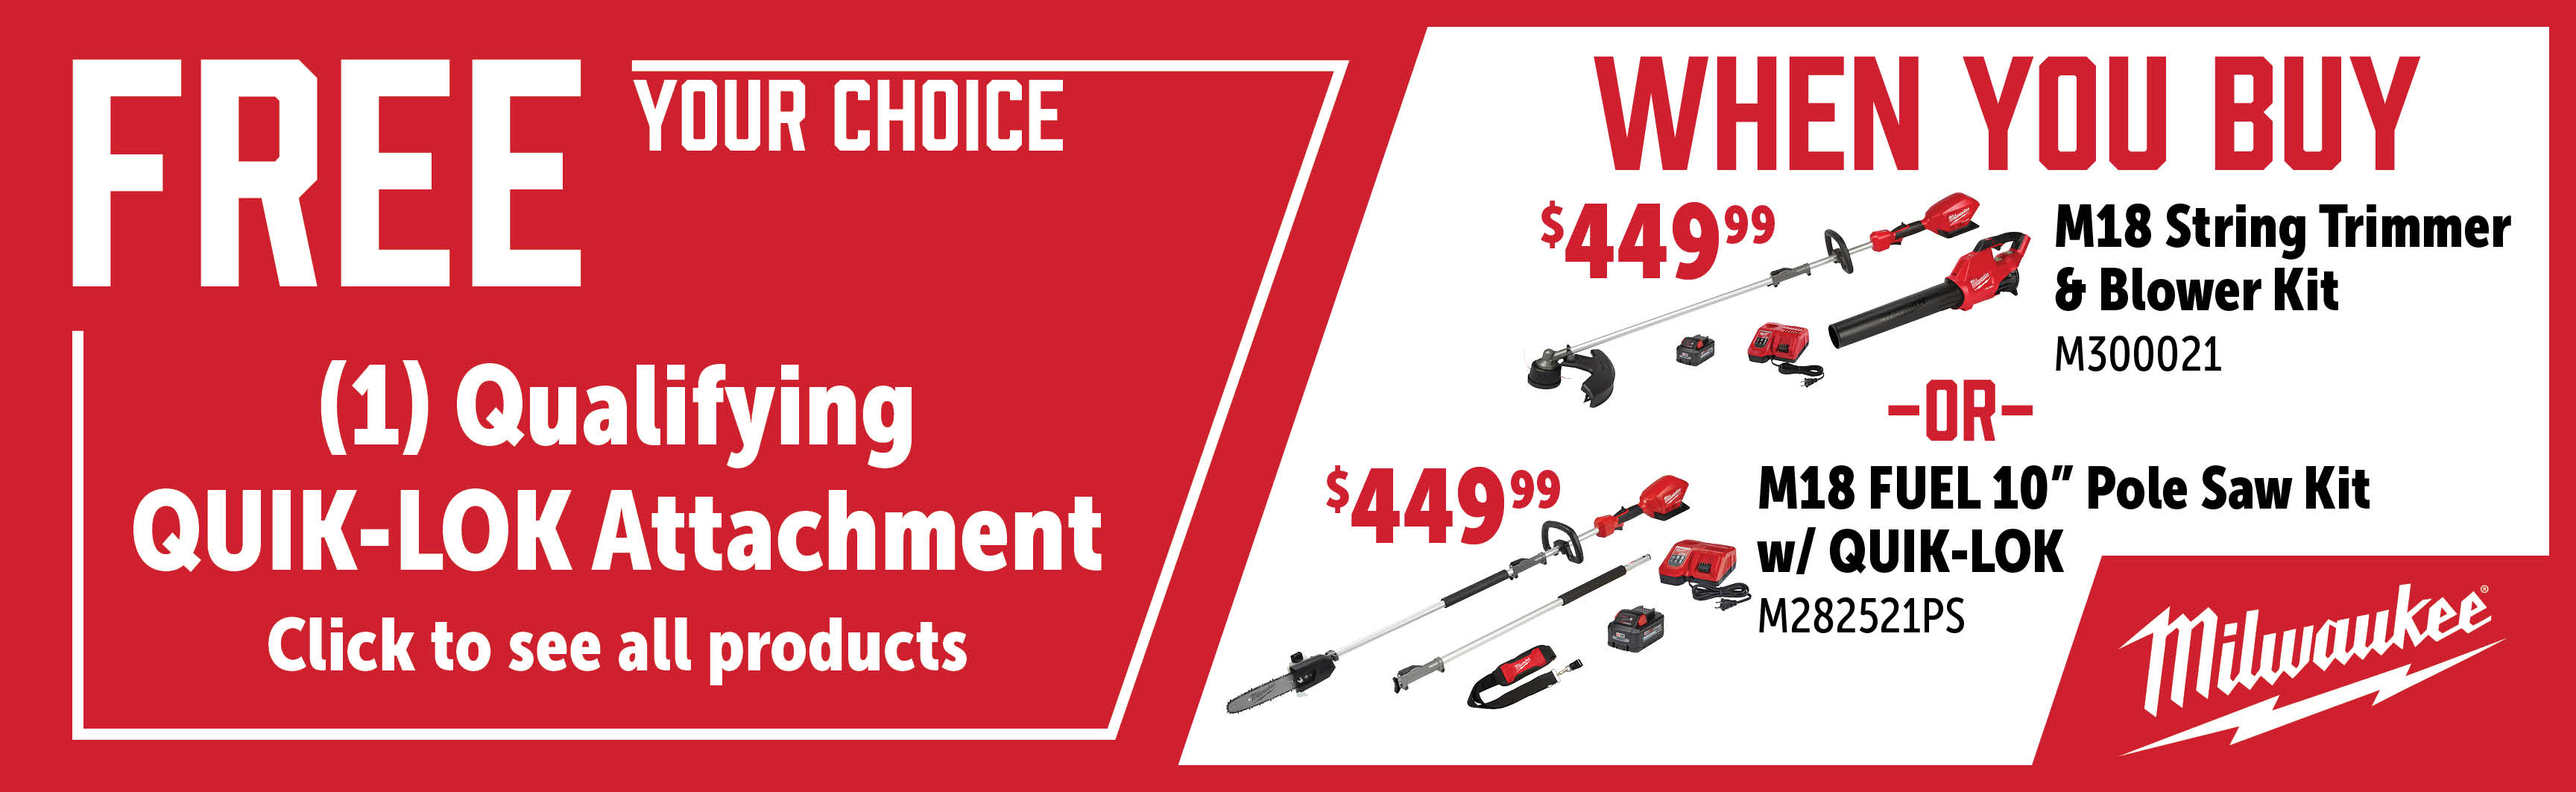 Milwaukee Mar-Jul: Buy an M300021 or M282521PS and Get a FREE Quik-Lok Attachment